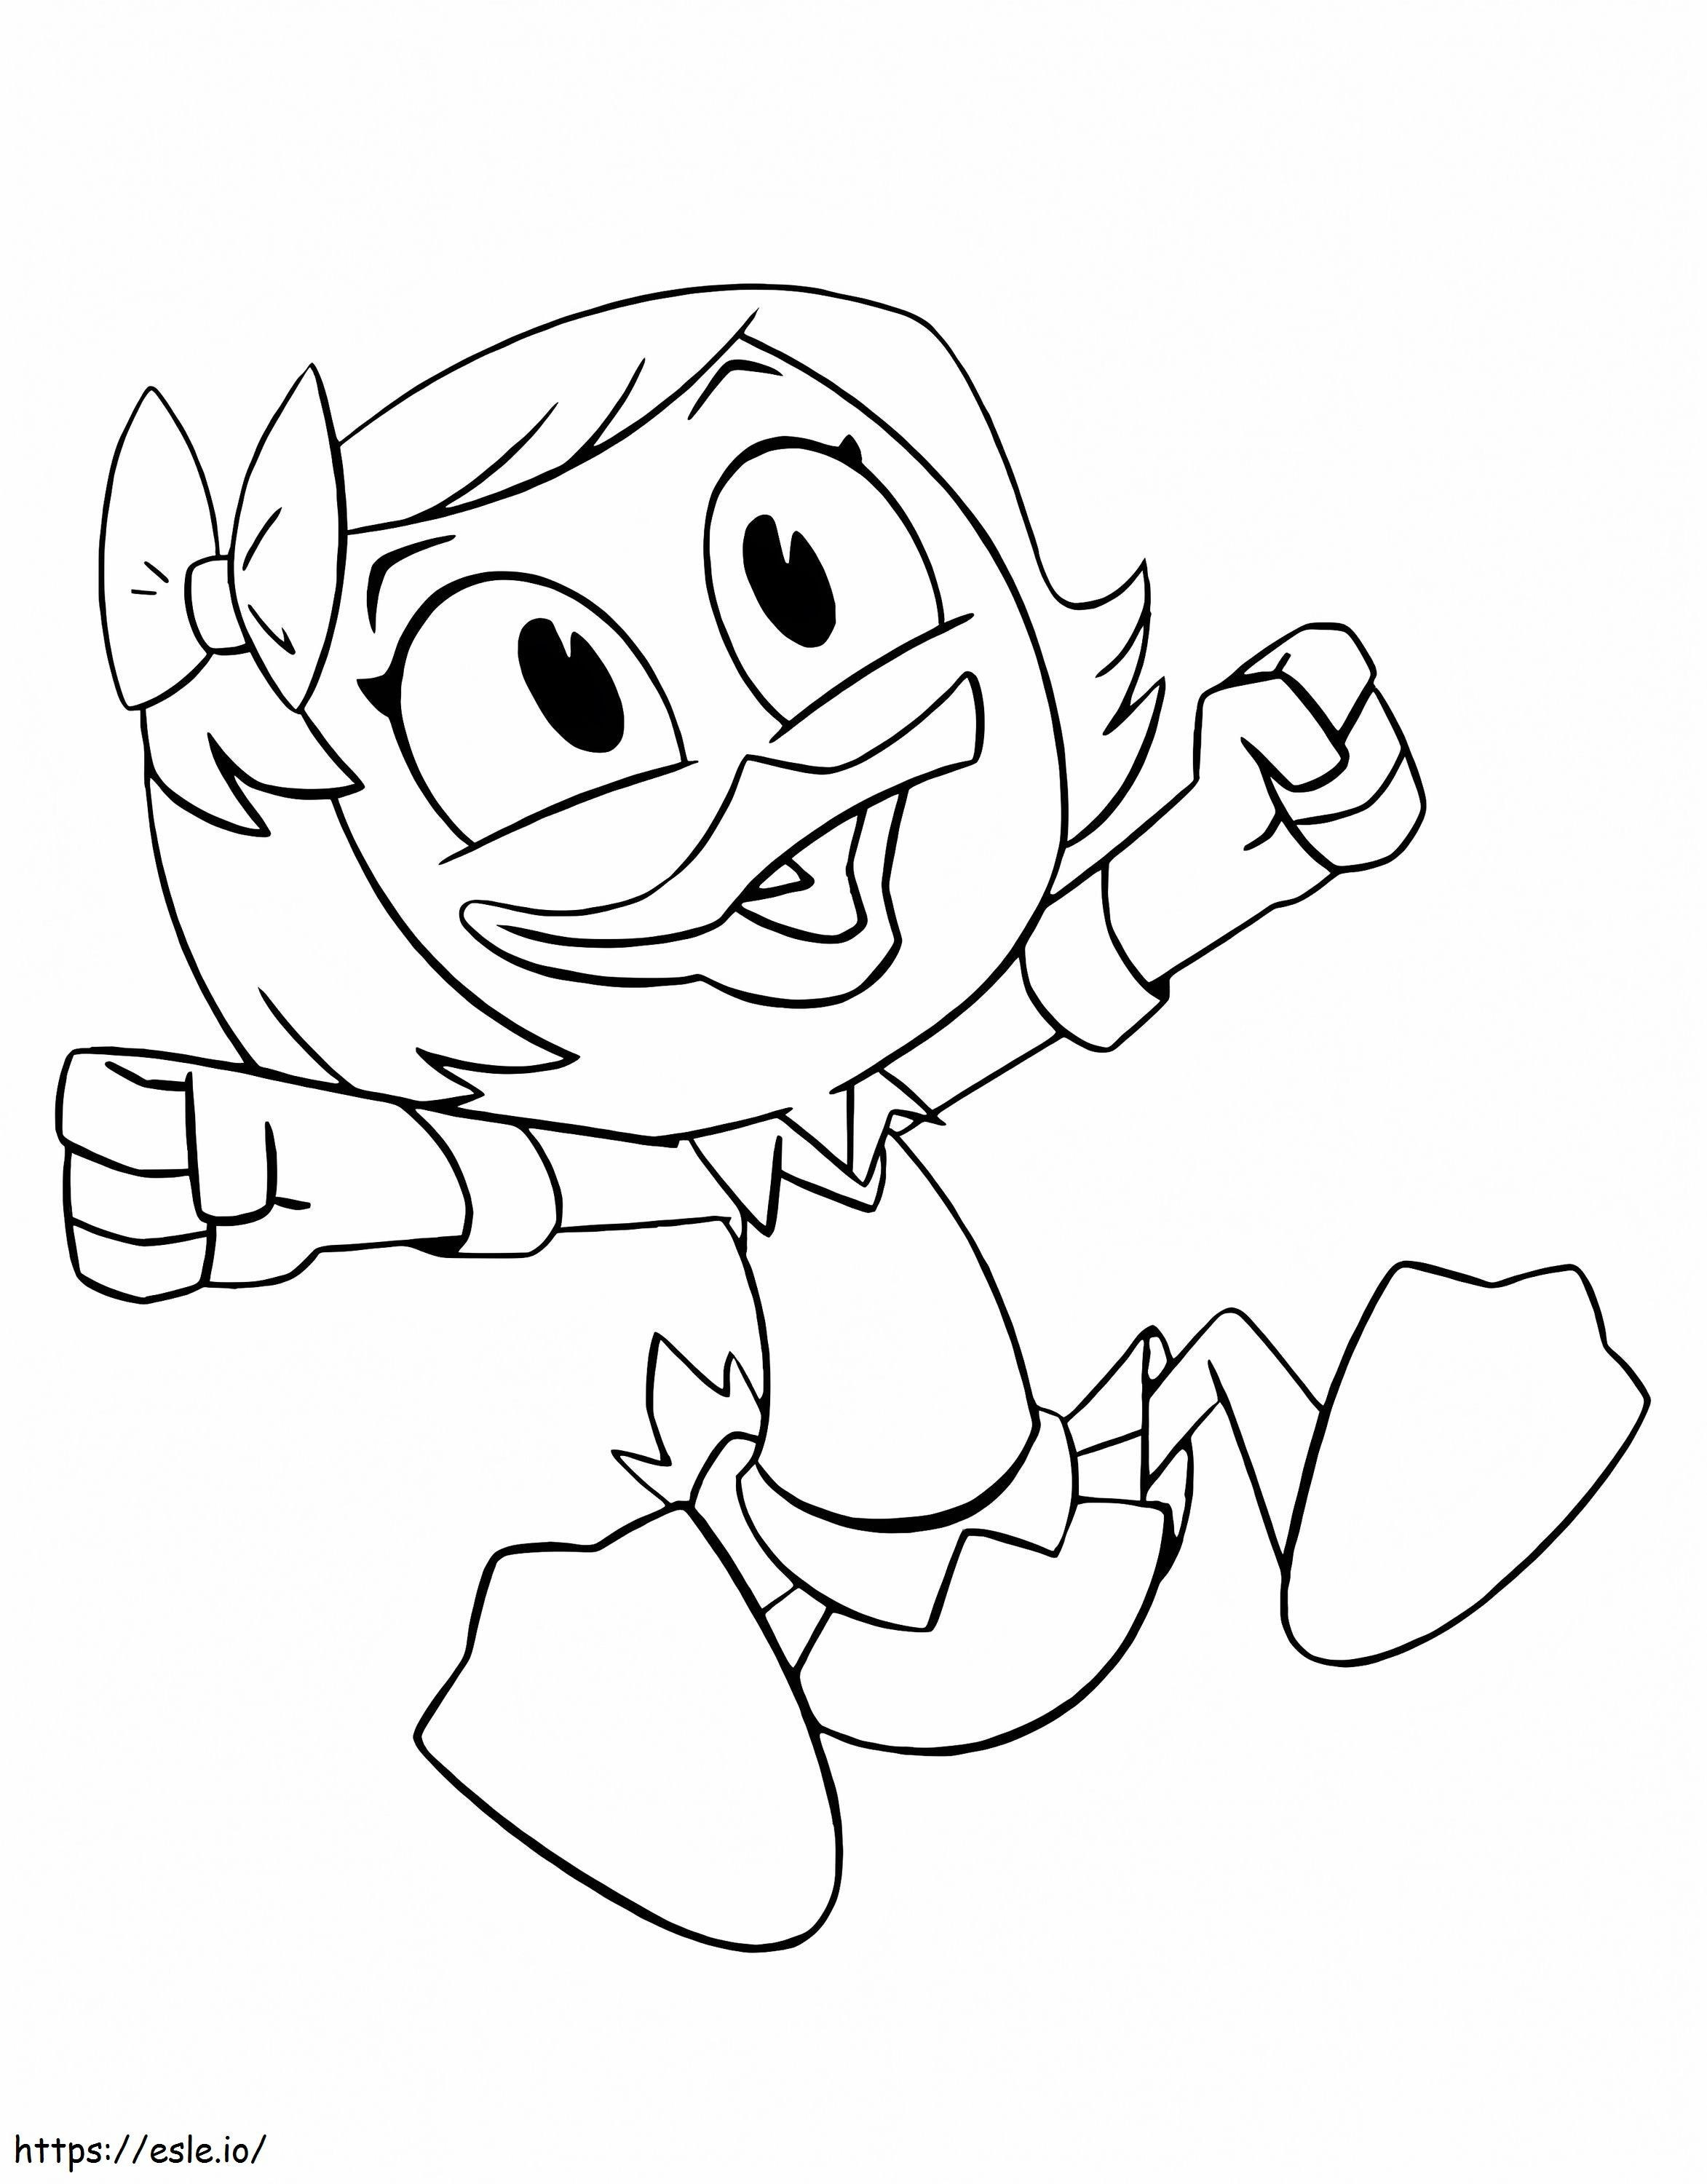 Webby Vanderquack From Ducktales coloring page